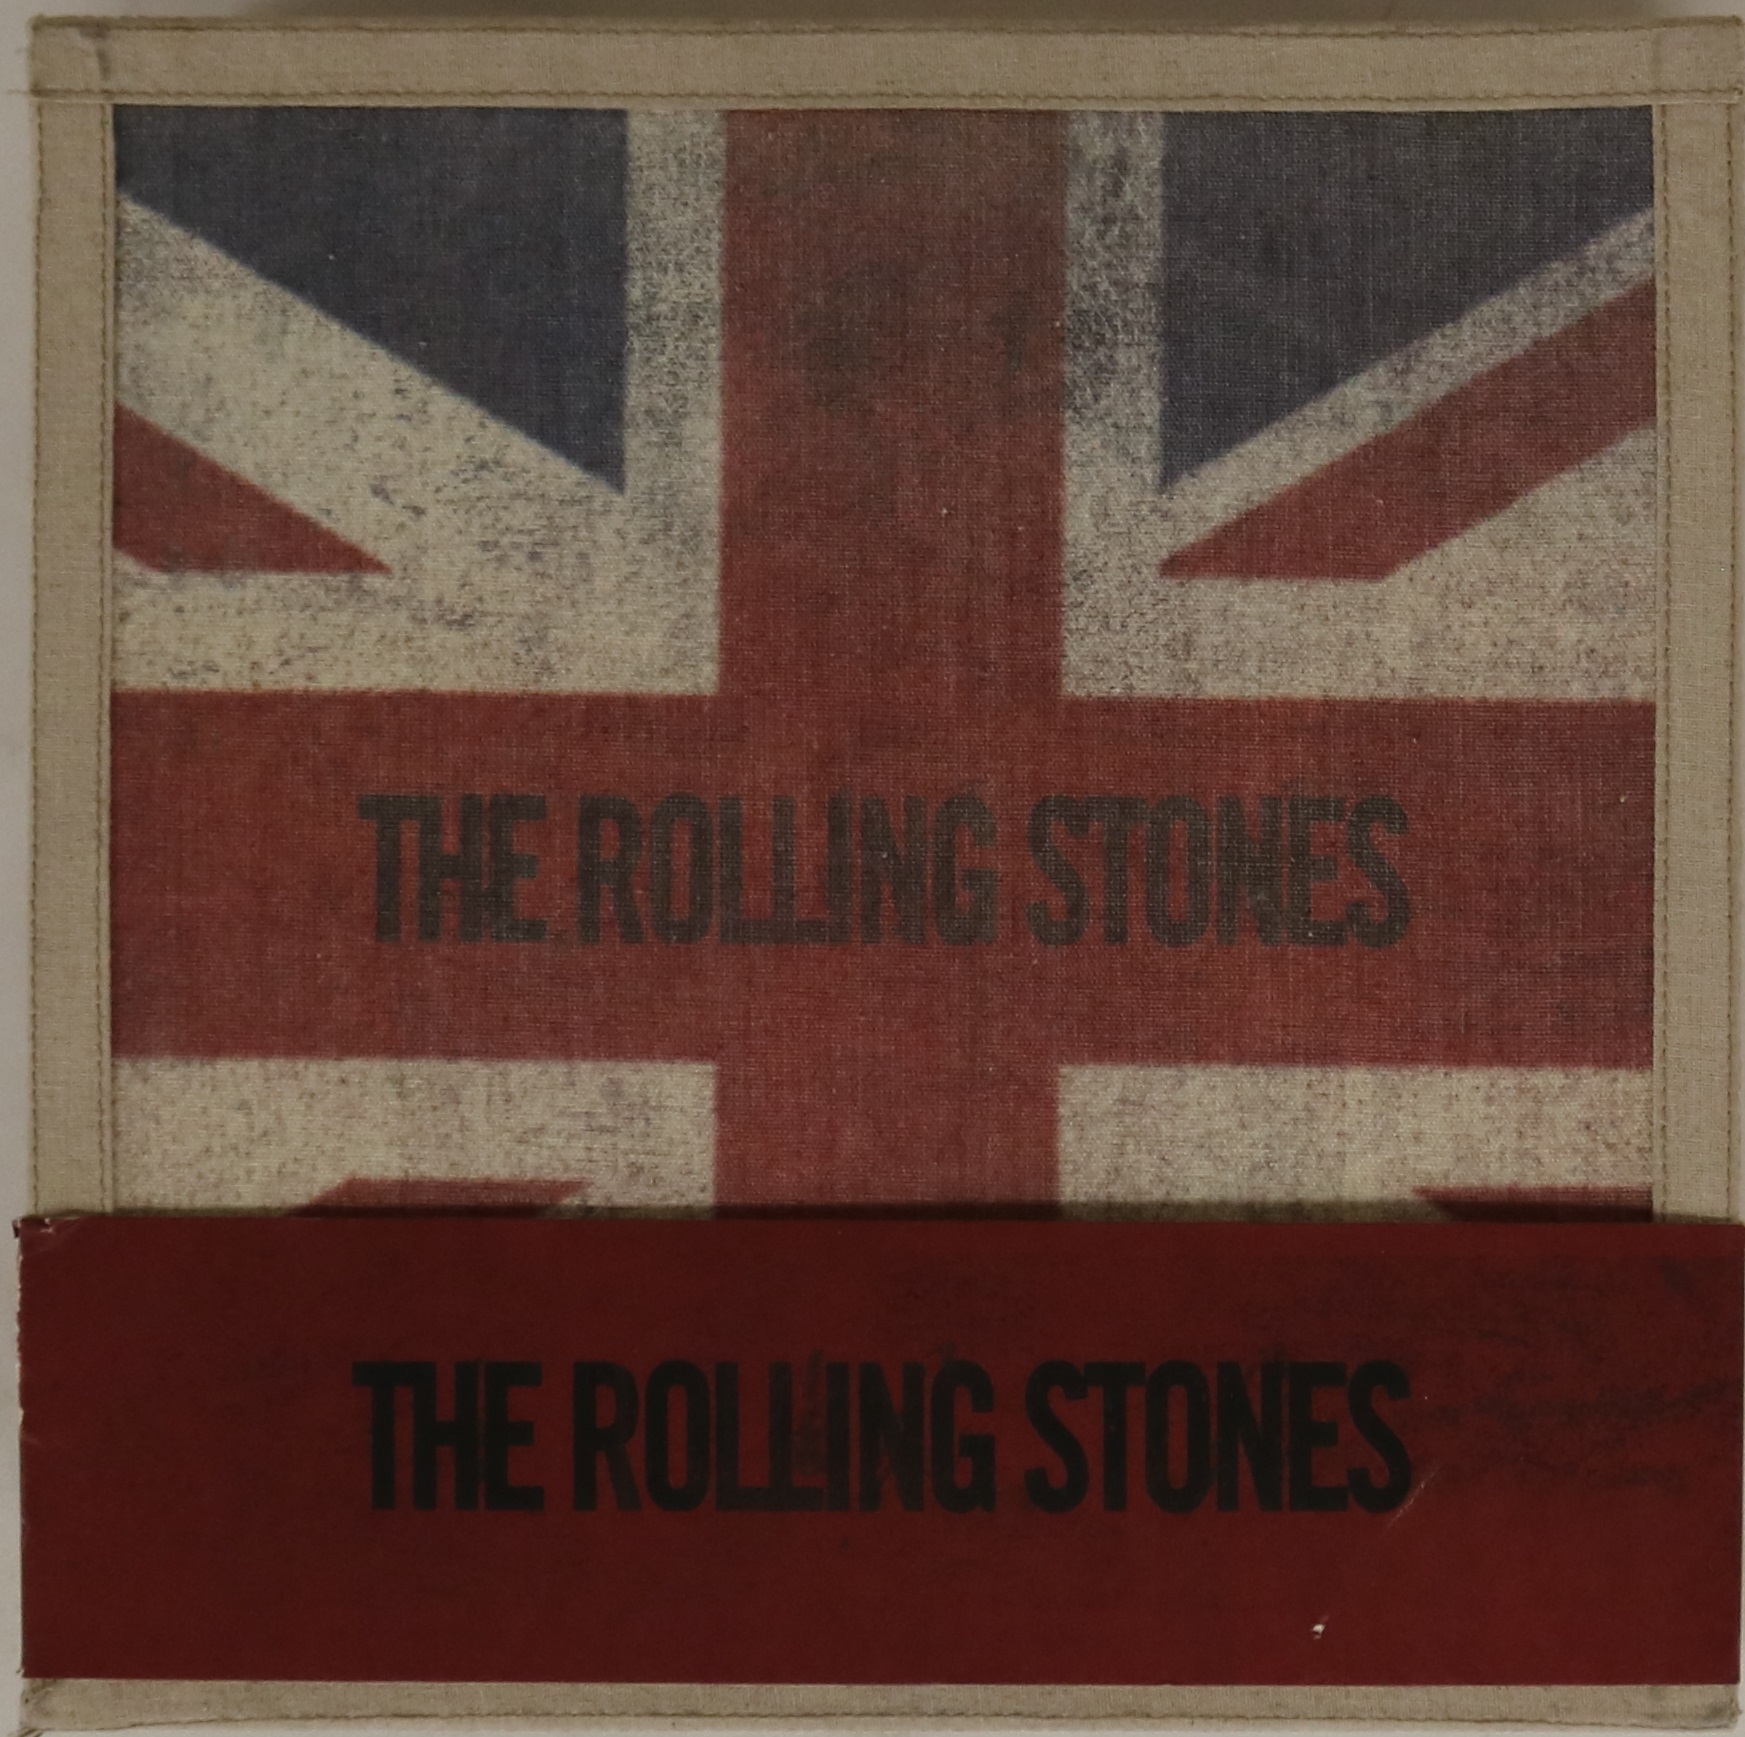 THE ROLLING STONES - YOU GET WHAT YOU NEED (THE SEVENTIES COMPLETE REMASTERED) - CD BOX SET.